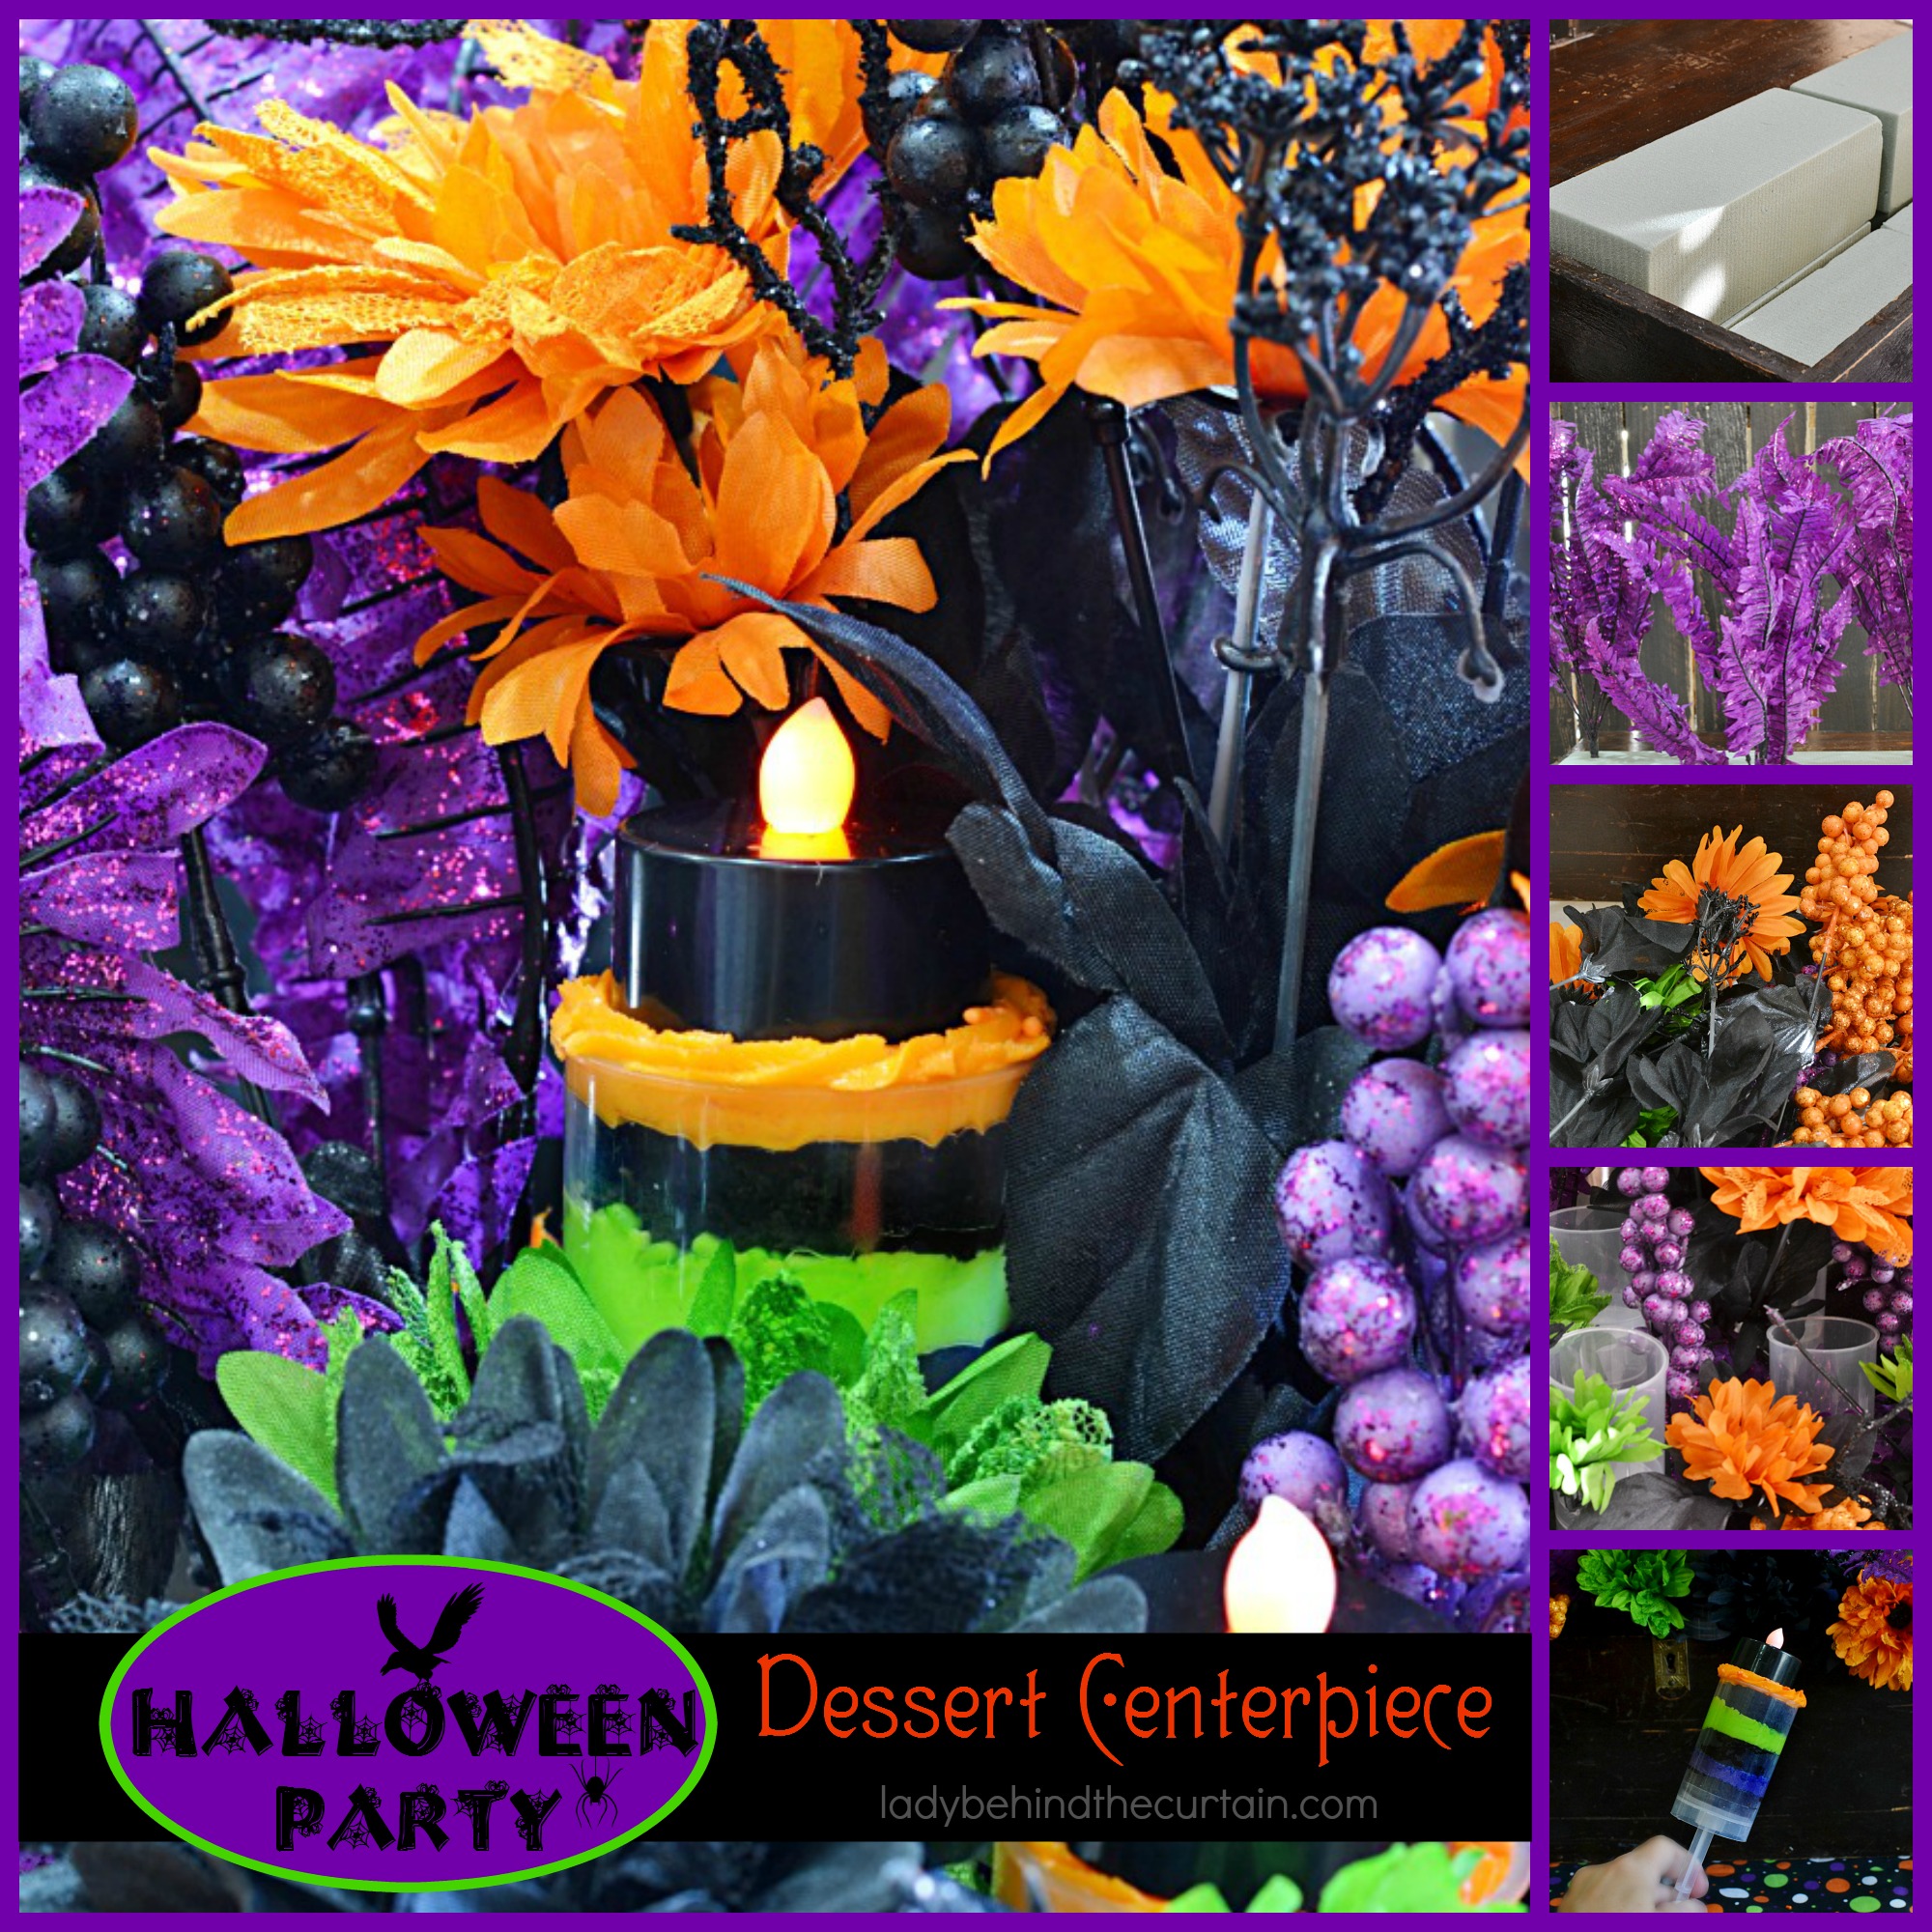 Halloween Party Dessert Centerpiece | This colorful centerpiece doubles as dessert! If you look closely you will see push up pops tucked in the arrangement. Perfect for Halloween!